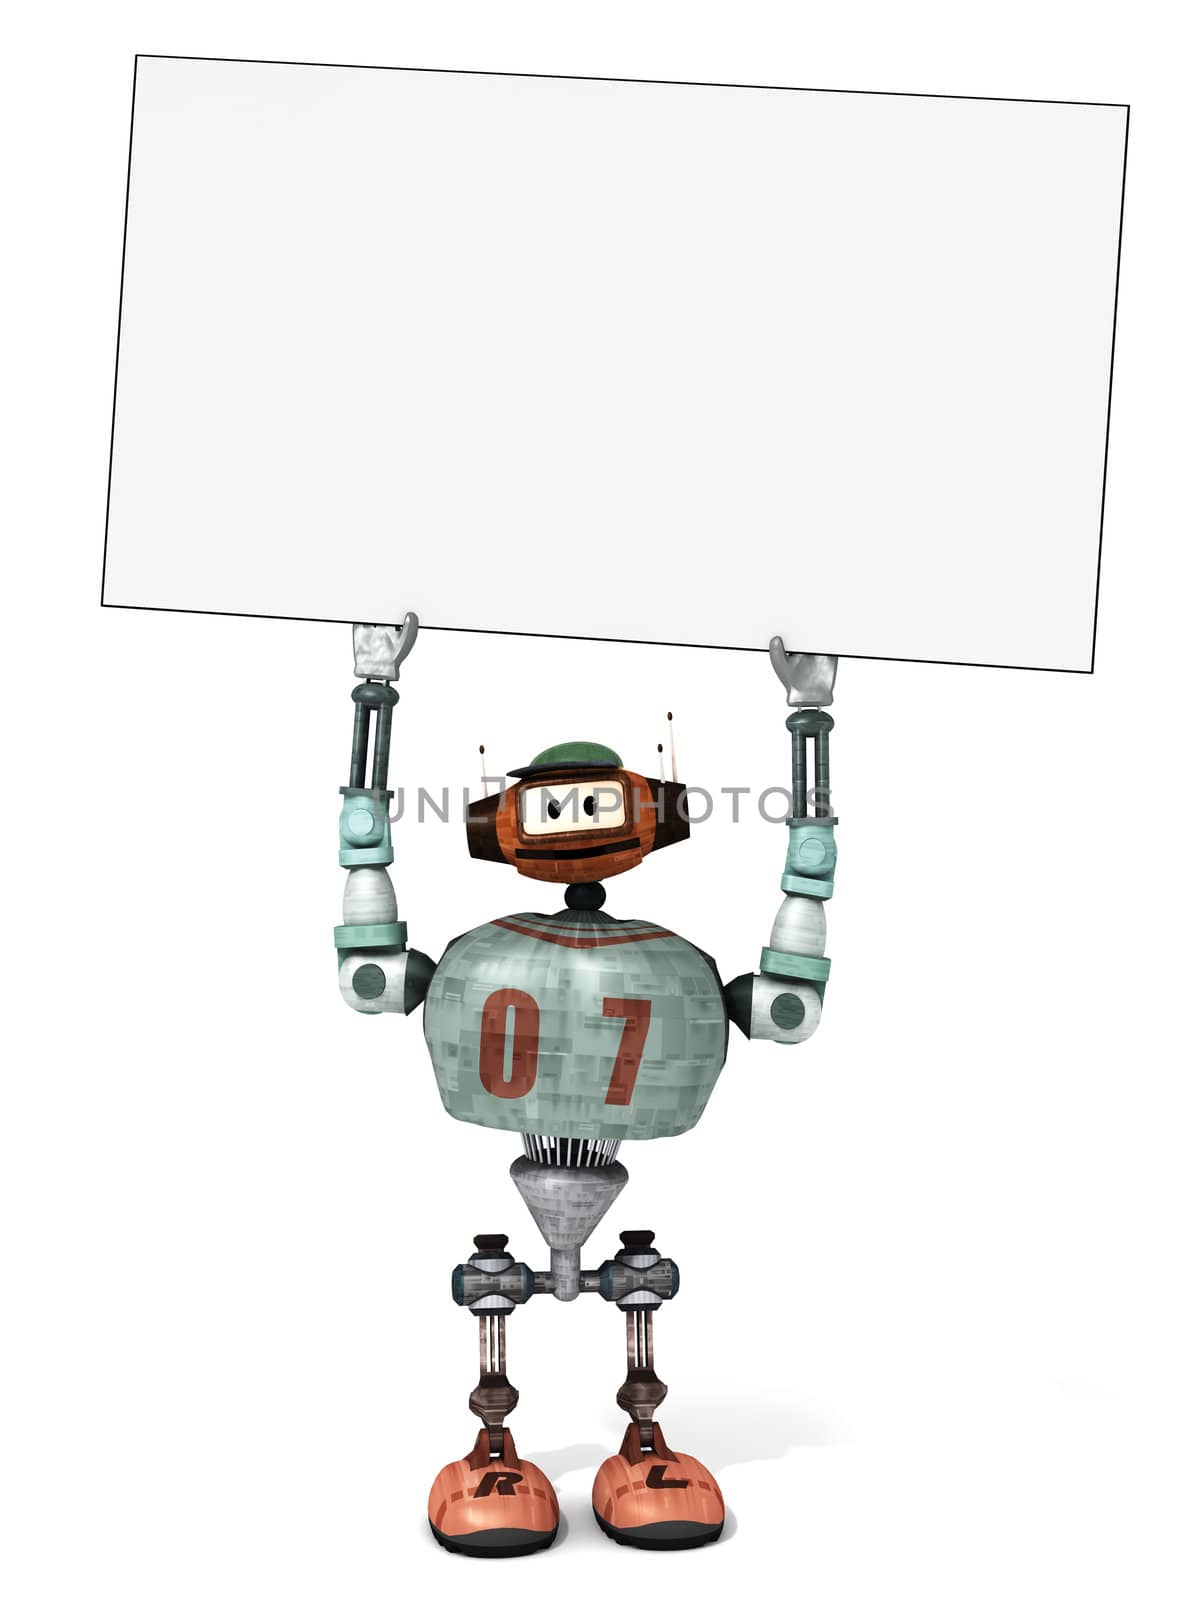 Djoby the robot holding an empty poster above its head with a white background